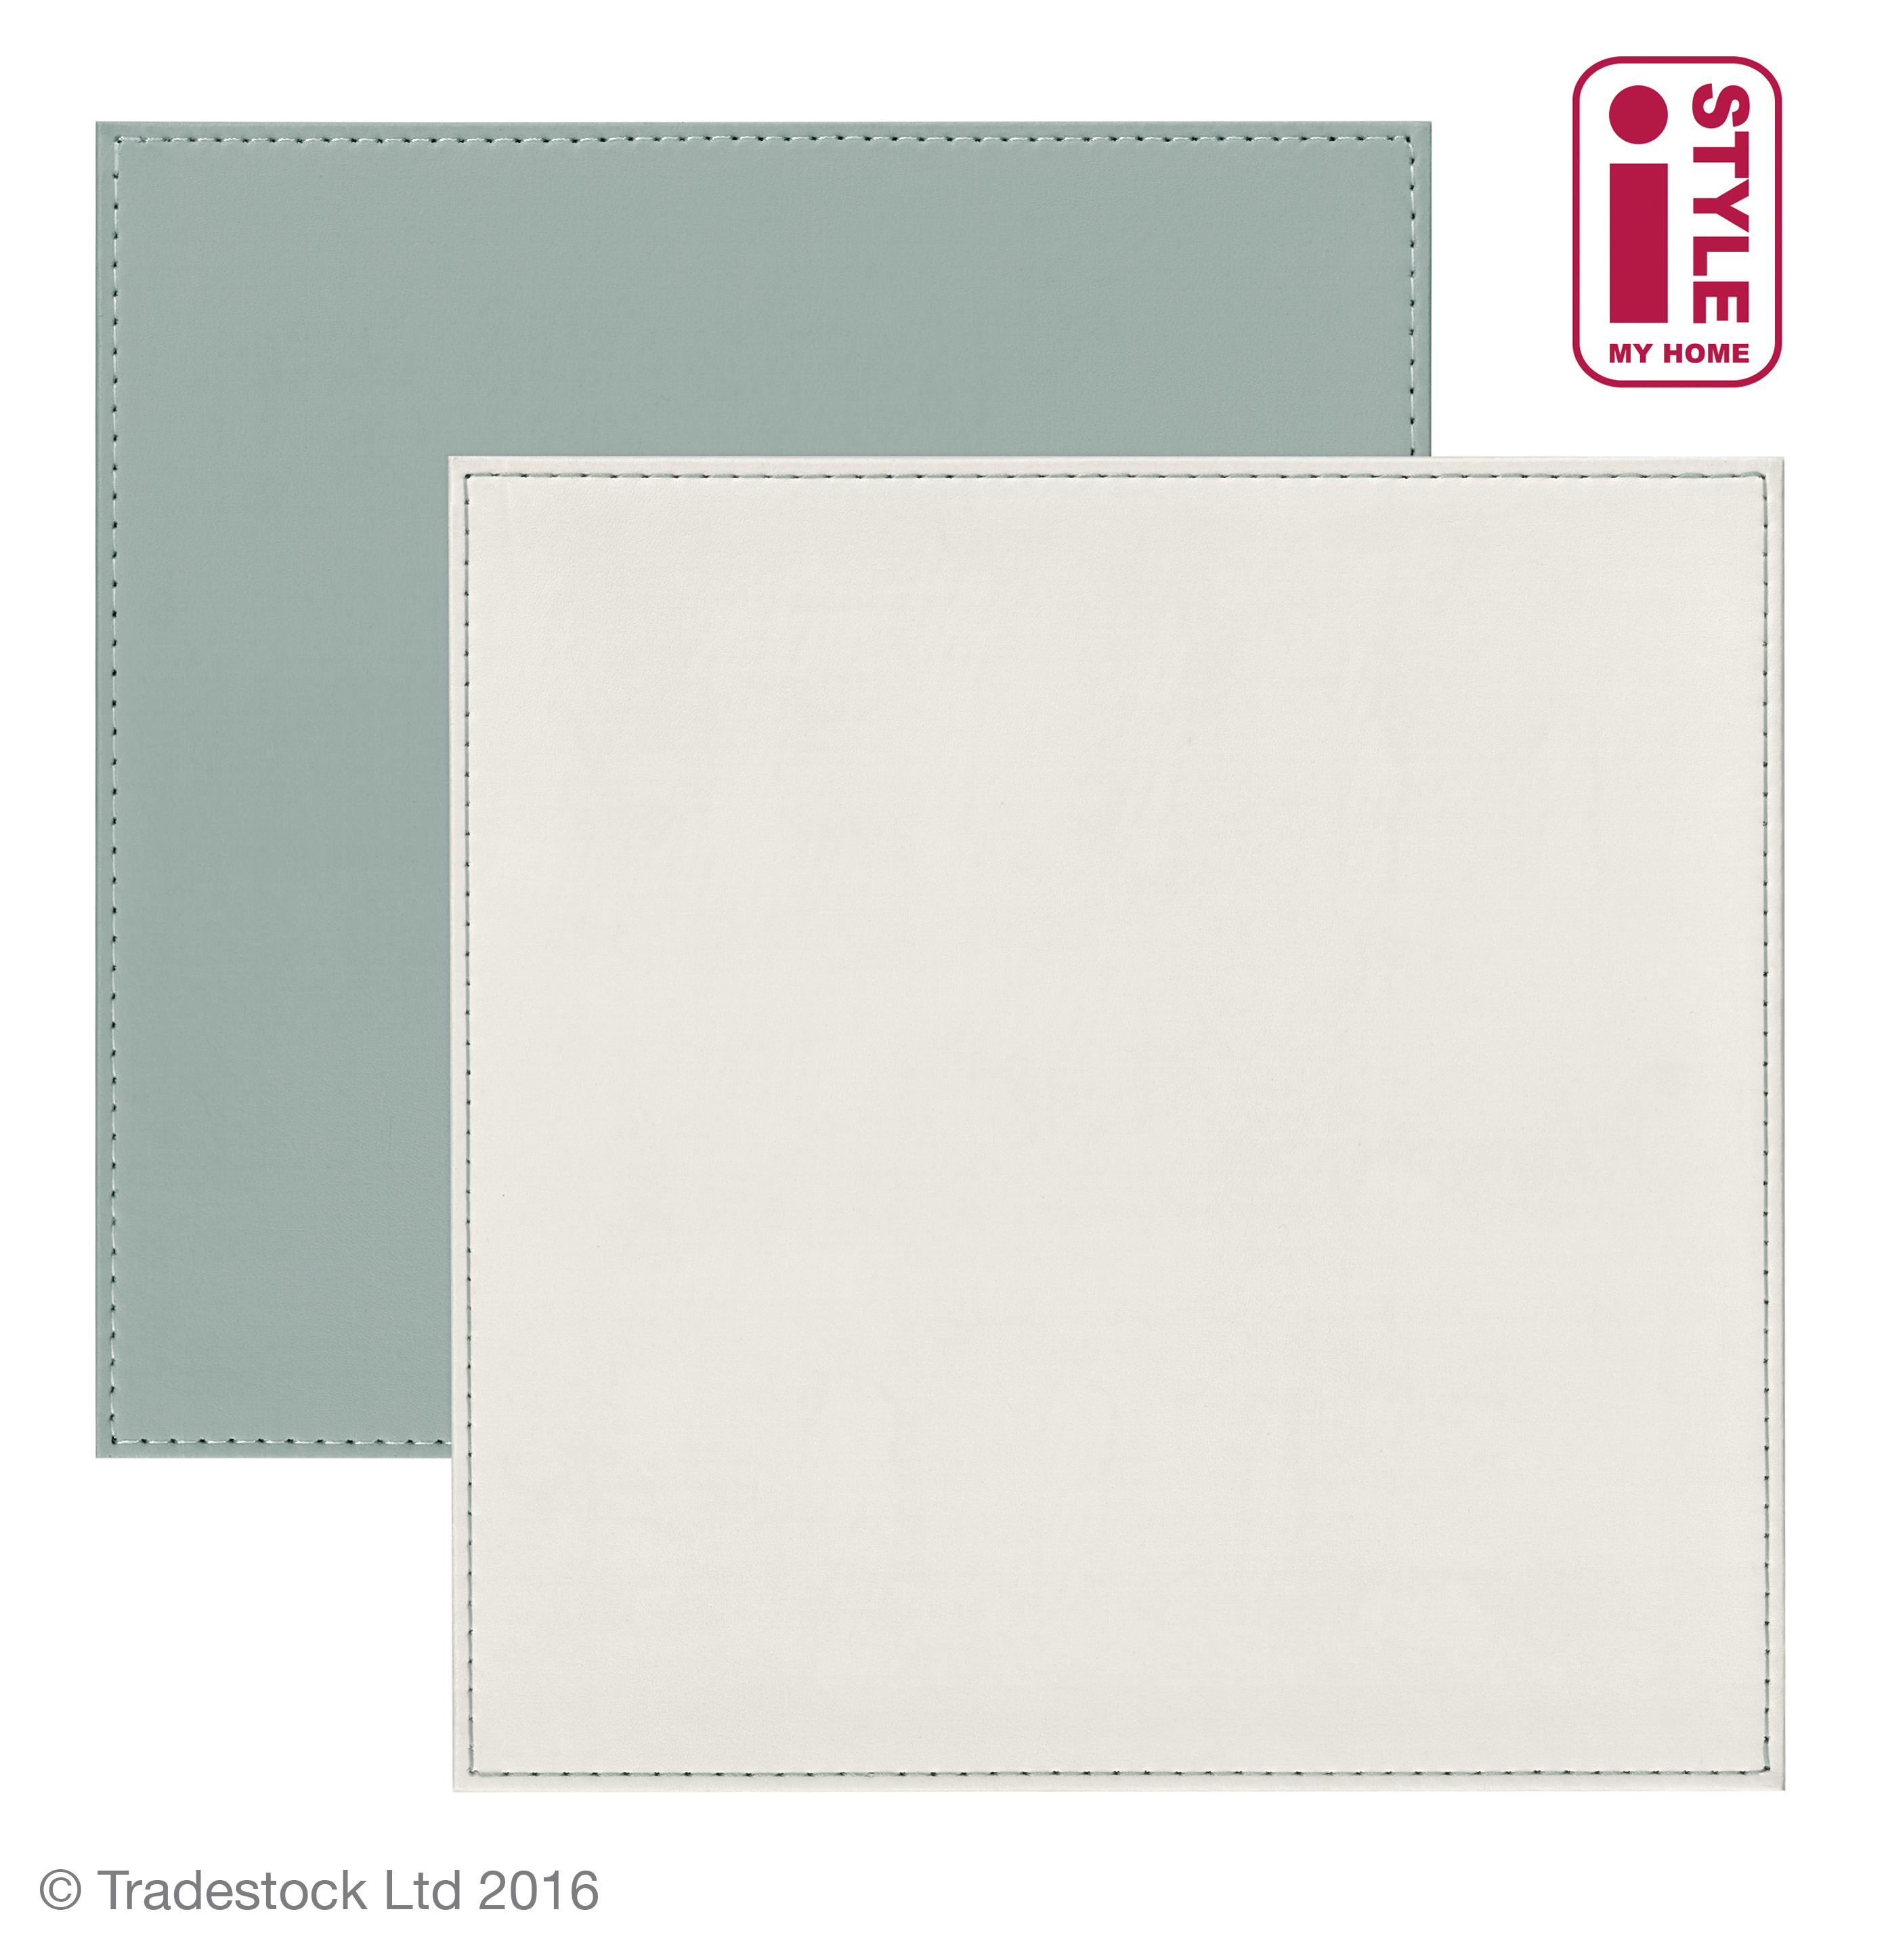 Freeform Faux Leather Square Placemat & Coaster (Set of 4)